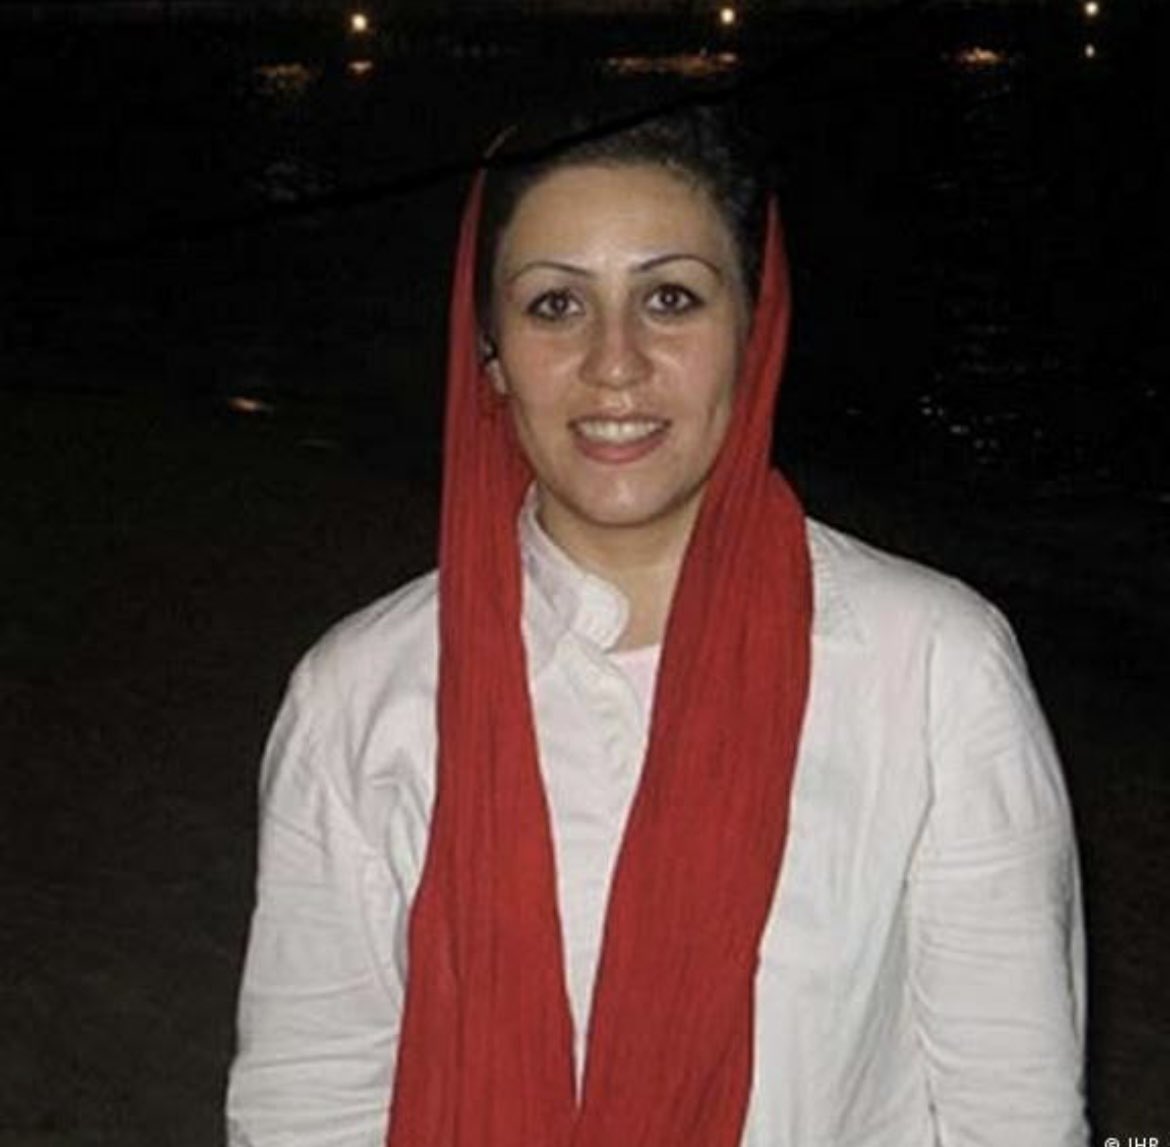 🔹Political prisoner #MaryamAkbariMonfared who is behind bars 4 the past 13 years for demanding justice for her 4 siblings was beaten by a prison official!
🗣We ask human rights organizations to take urgent action!
#StopTorturingMaryam 
@USAmbUN @USAmbHRC @AmnestyIran @mbachelet